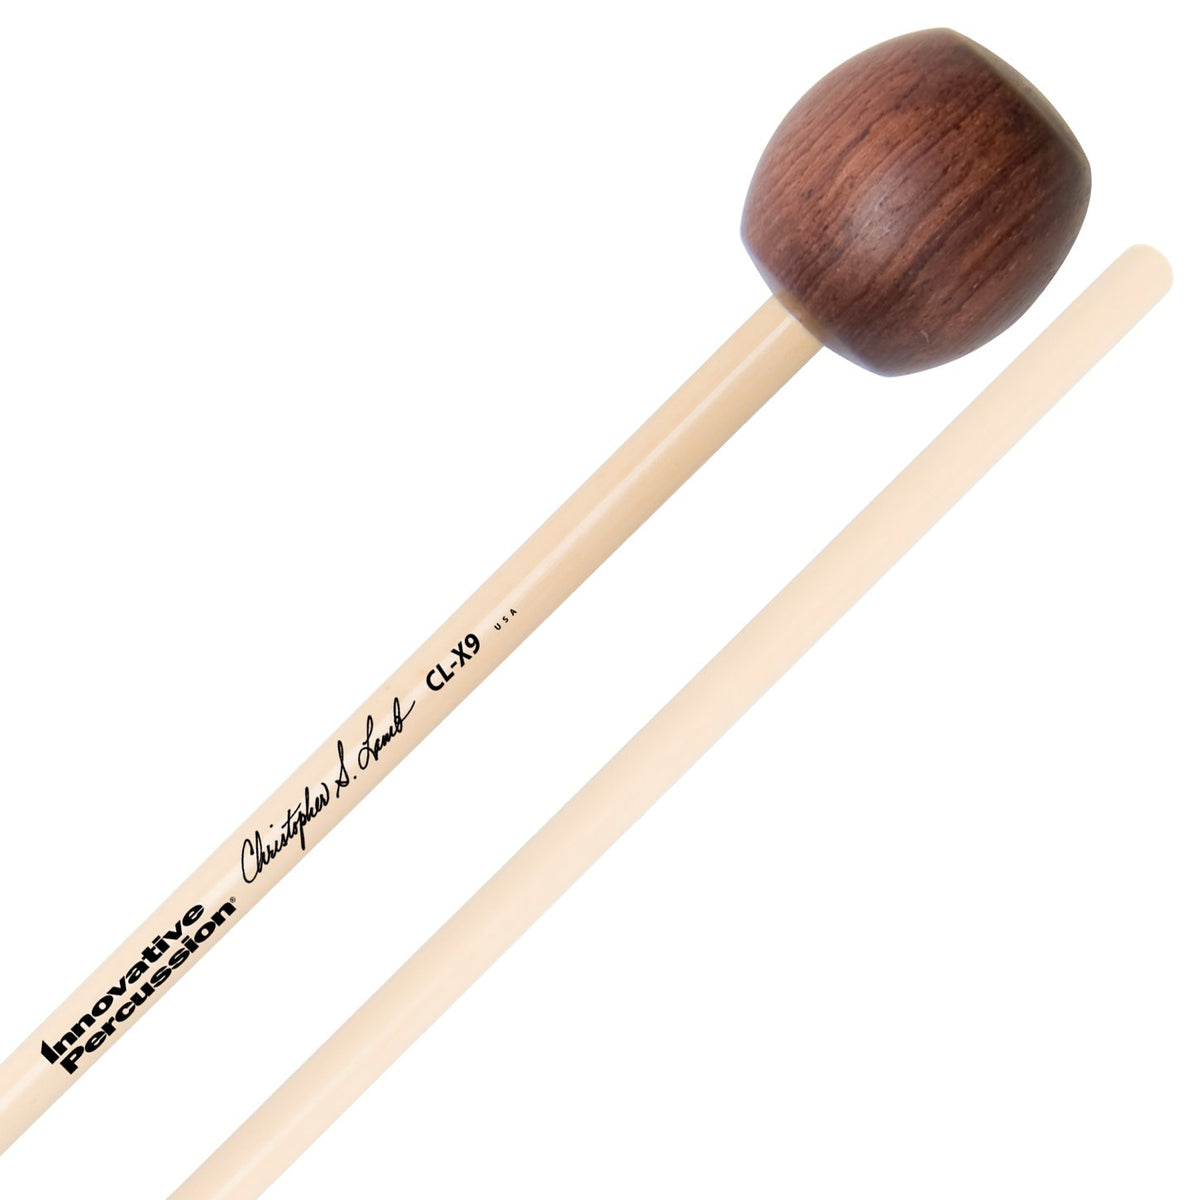 Innovative Percussion - Christopher Lamb Orchestral Series Concert Xylophone Mallets-Percussion-Innovative Percussion-CL-X9: Barrel/Wood Disk-Music Elements